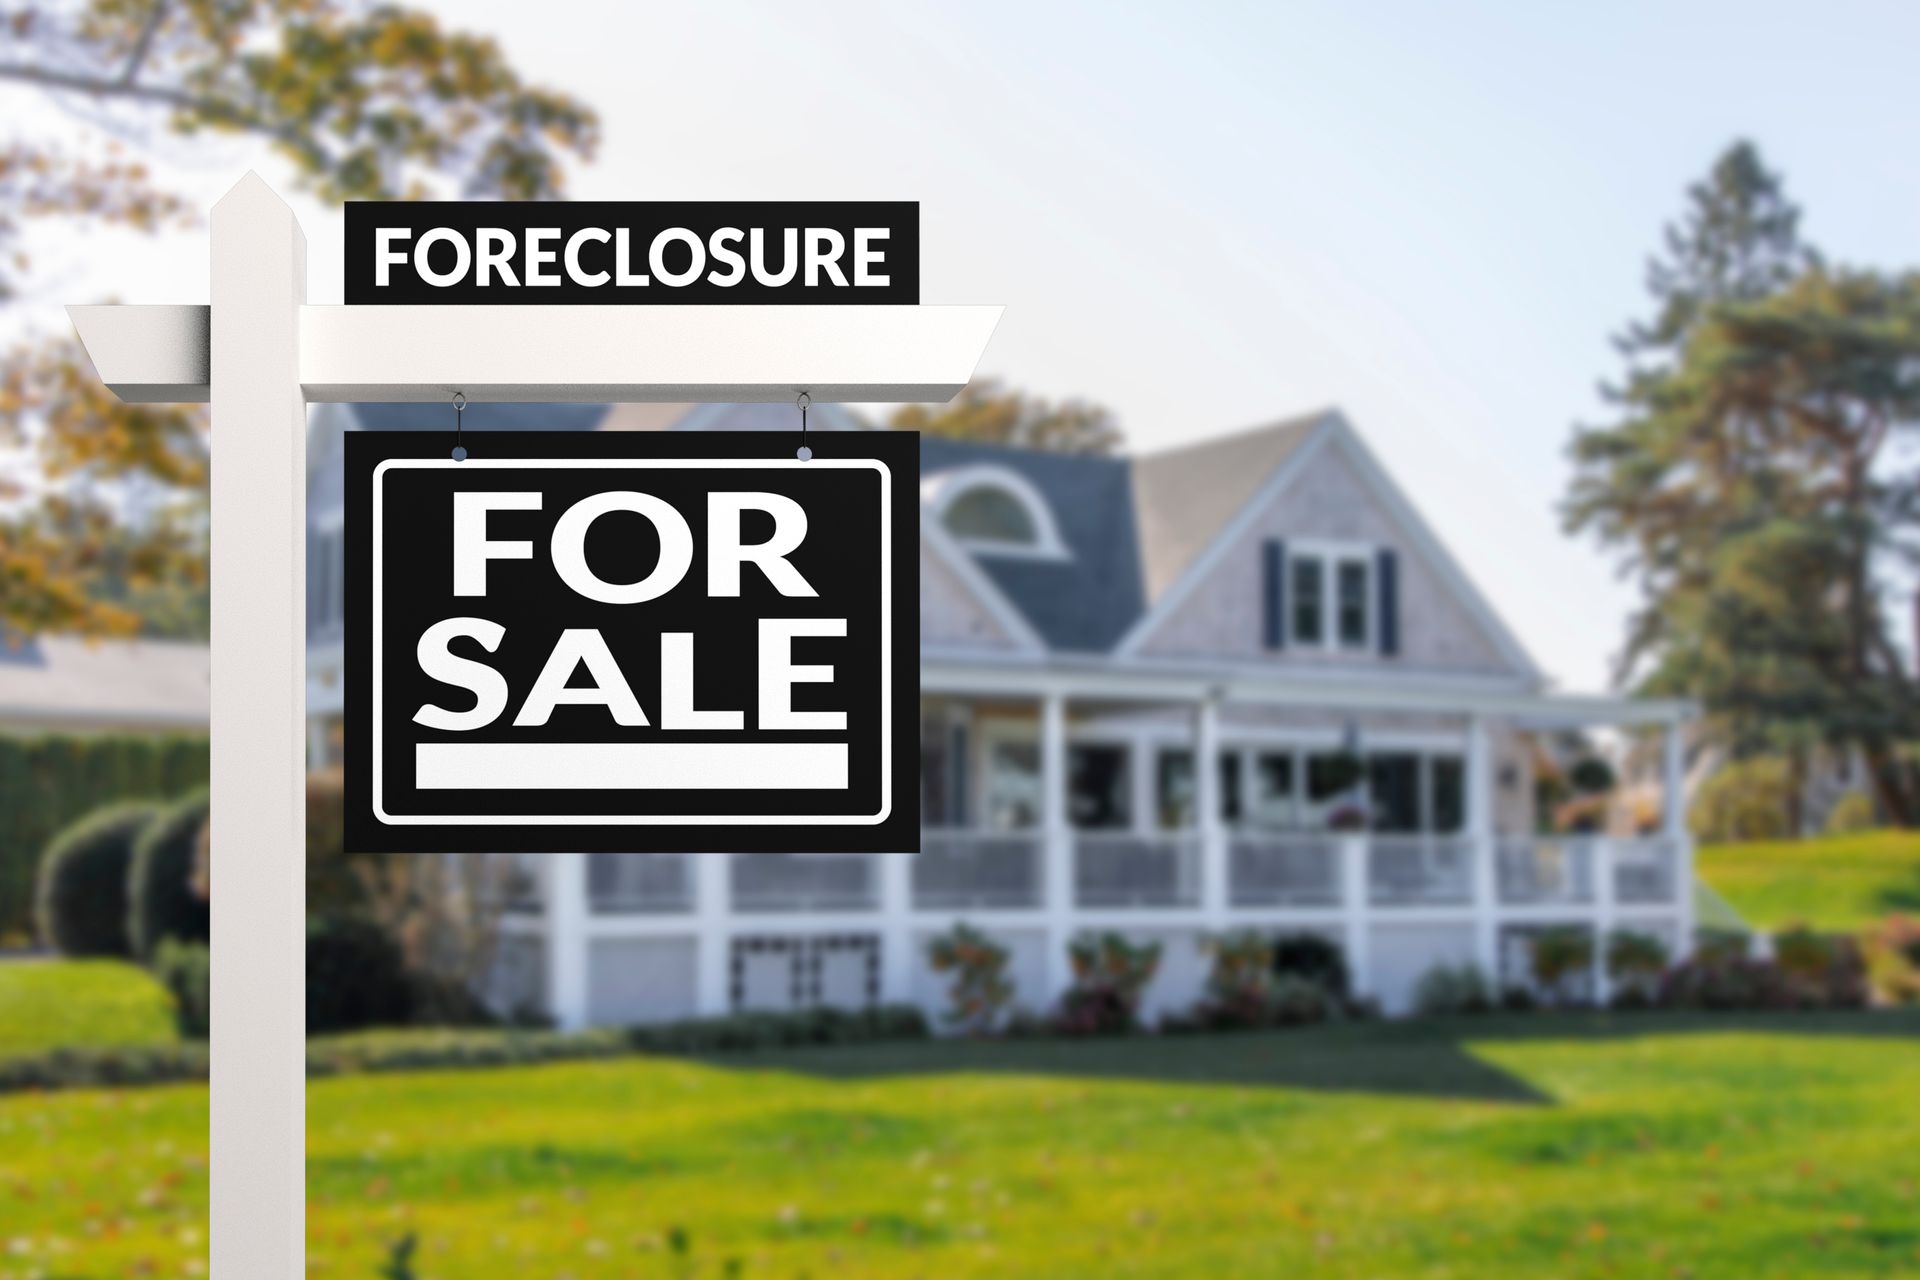 Did you know we'll even buy foreclosed homes fast for cash? Give us a call and let's talk through the details.